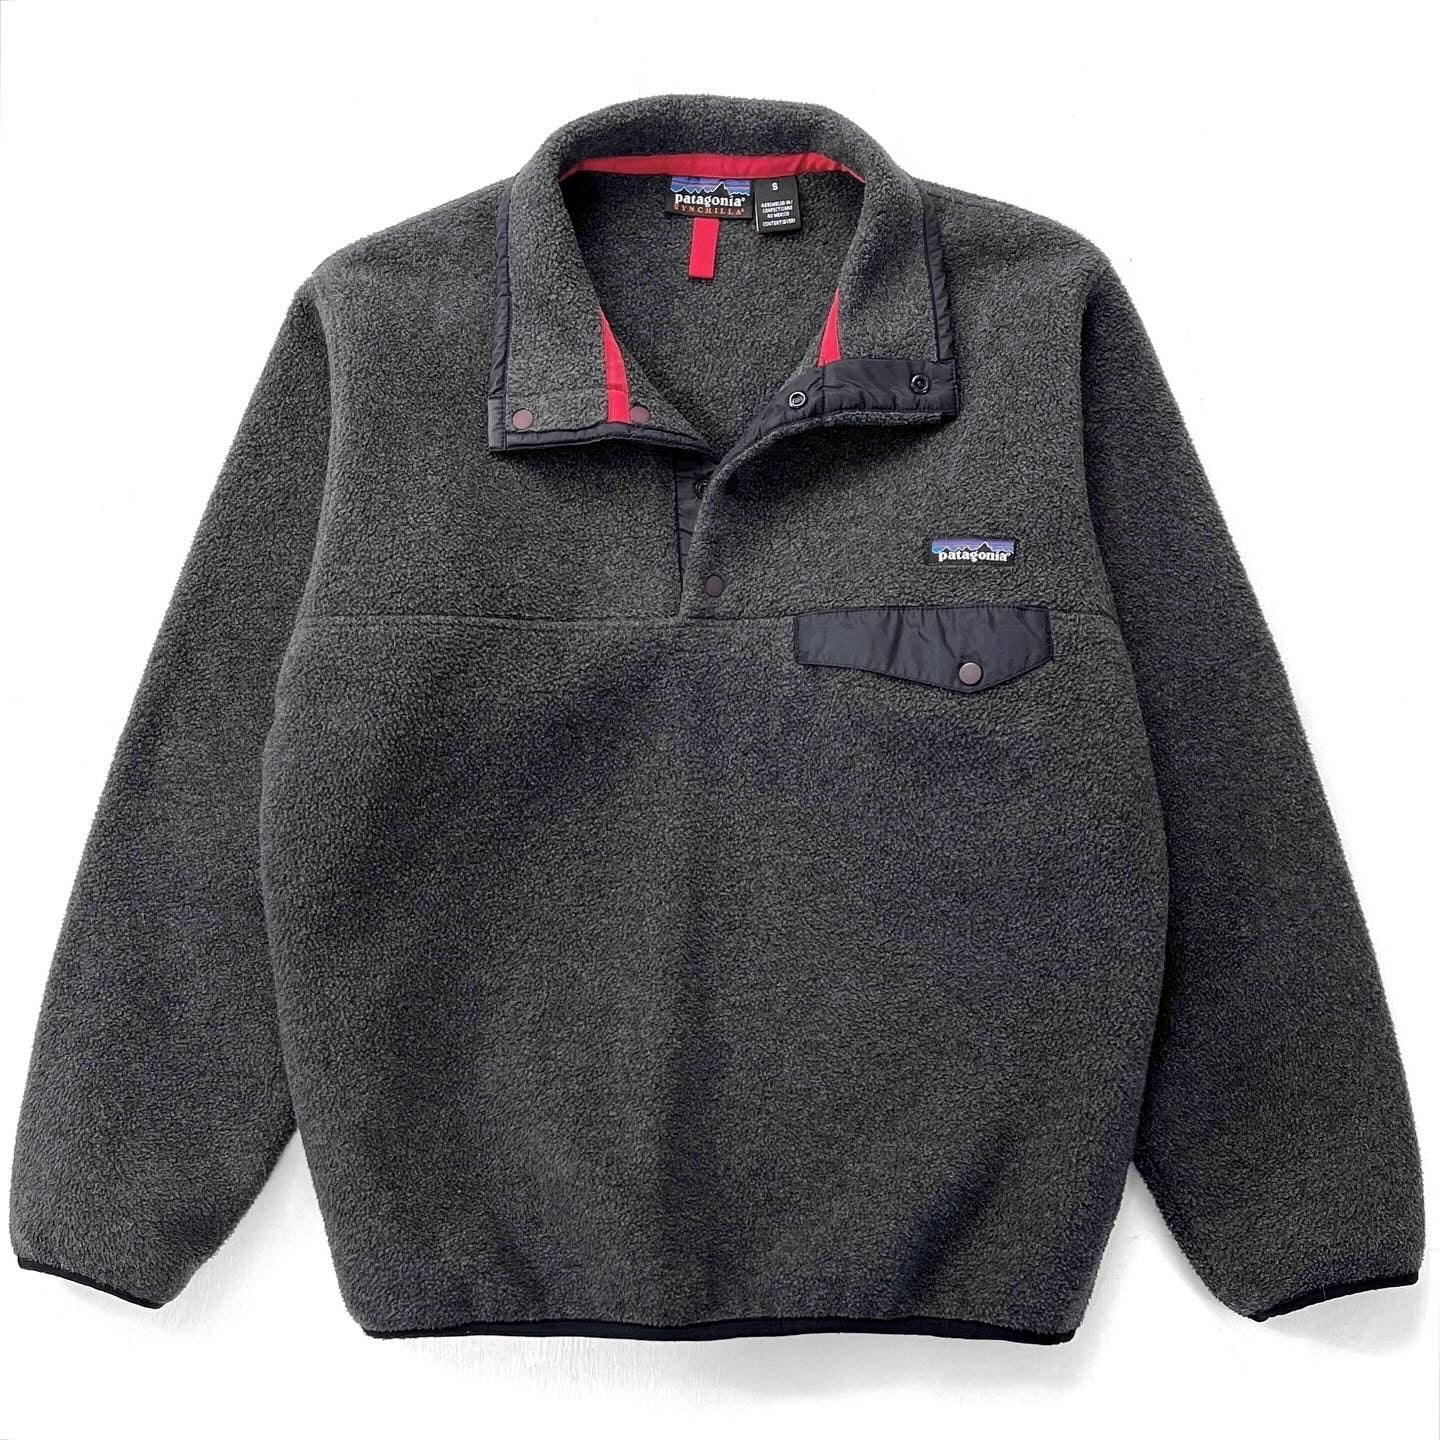 2000 Patagonia Synchilla Snap-T Fleece Pullover, Charcoal Grey (S)